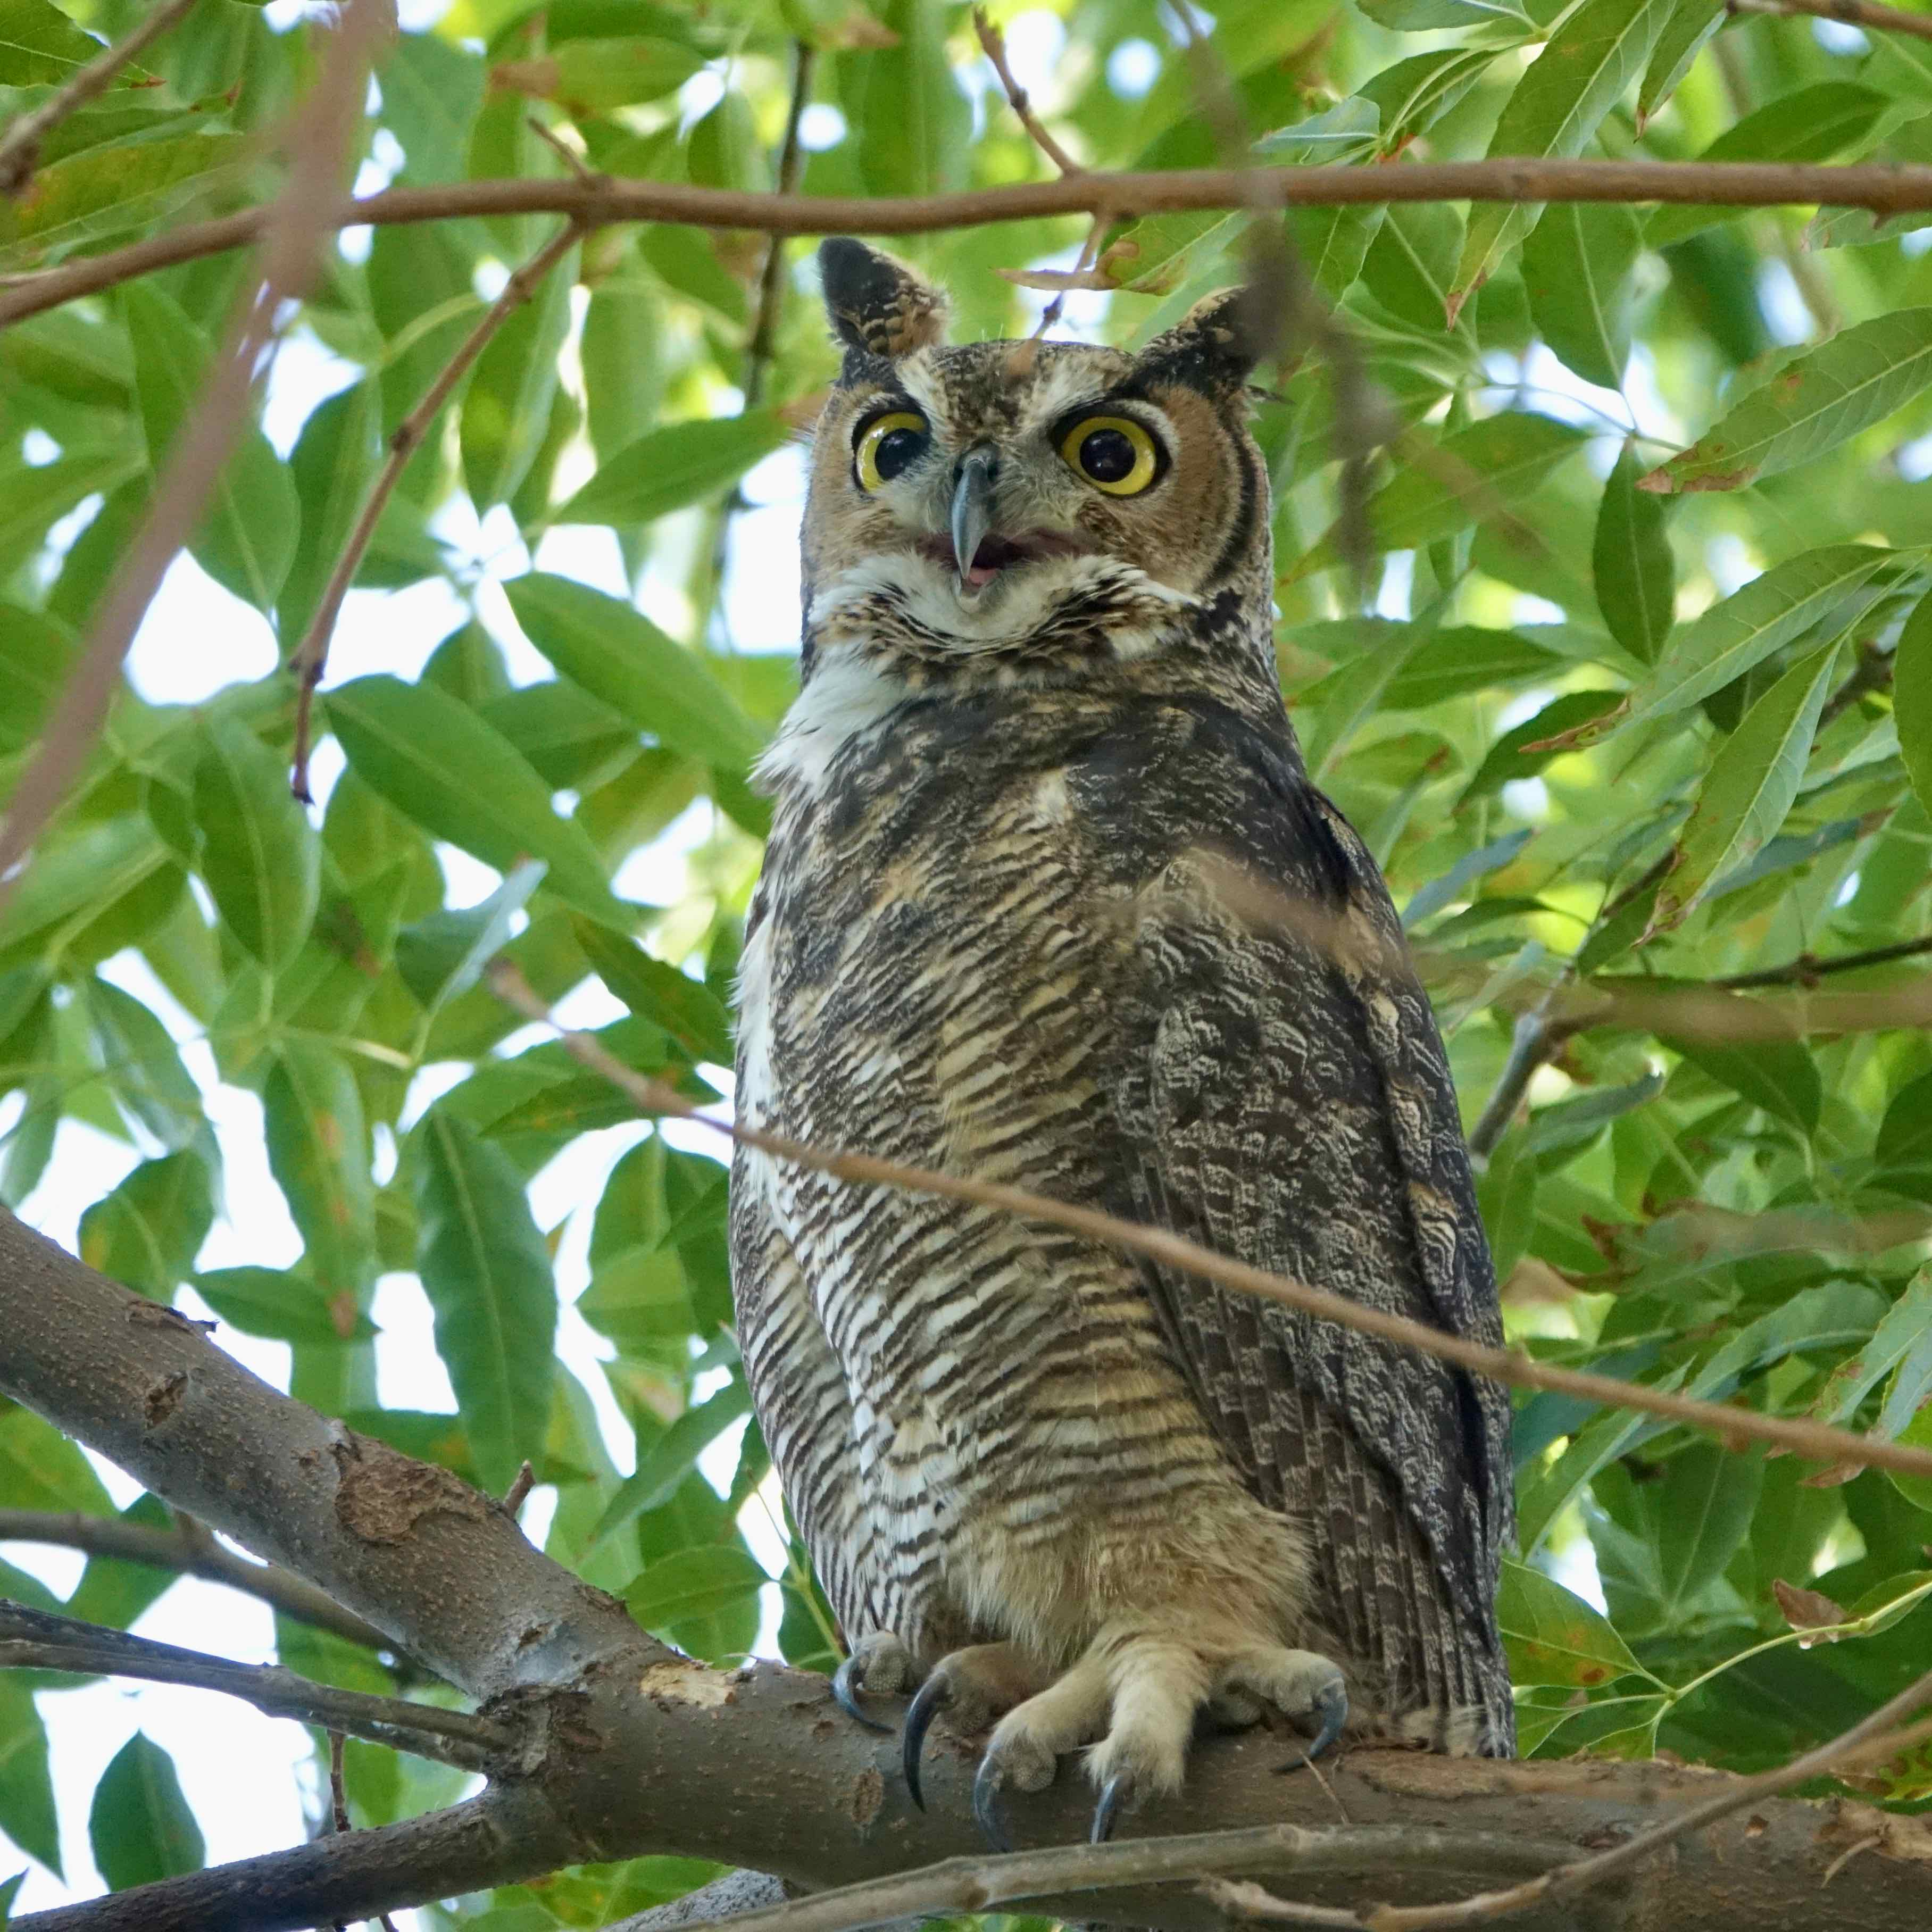 Great Horned Owl, North Hollywood. Photo by Karen Minkowski